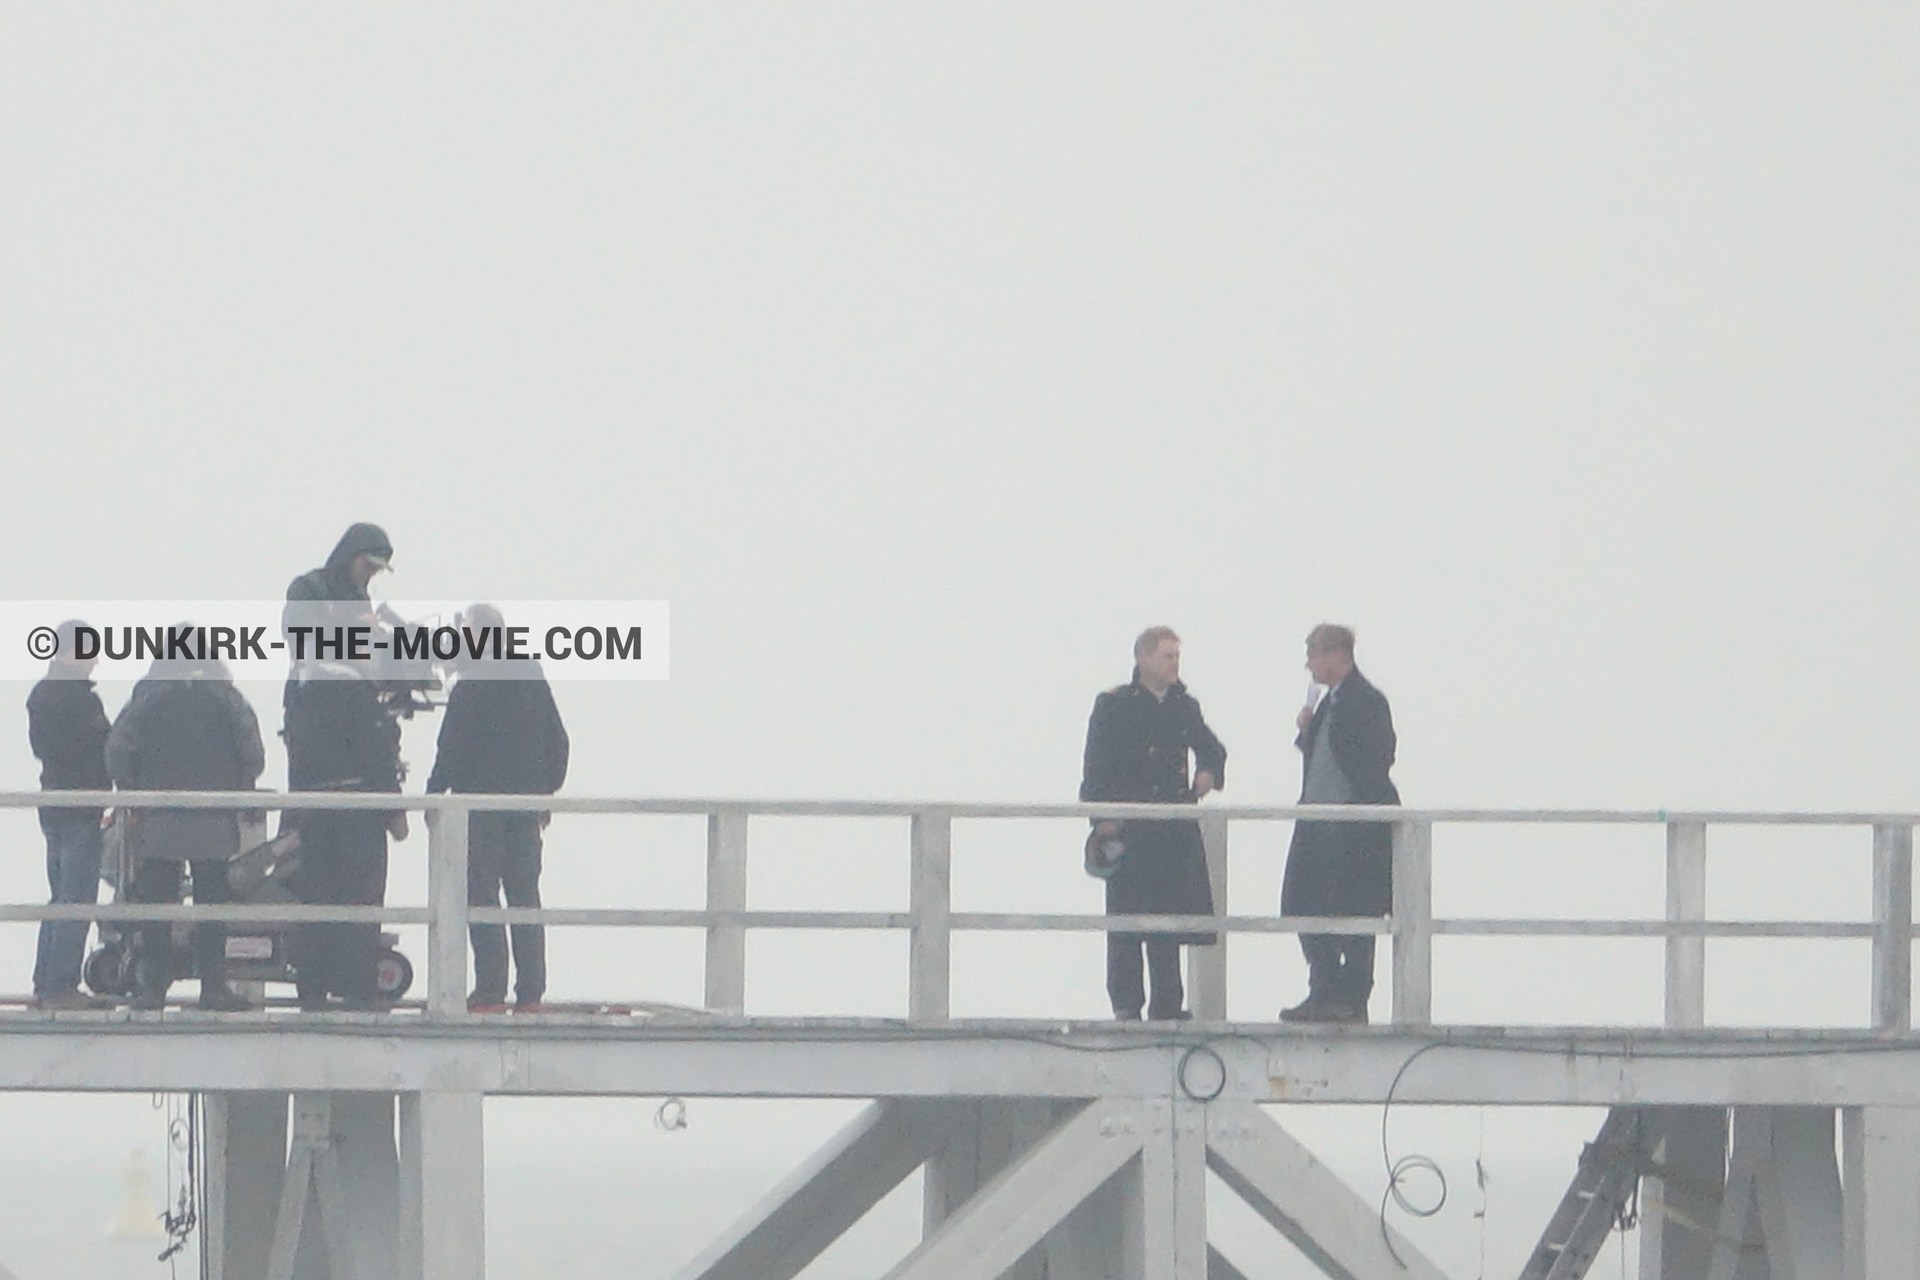 Picture with IMAX camera, Hoyte van Hoytema, EST pier, Kenneth Branagh, Christopher Nolan, technical team,  from behind the scene of the Dunkirk movie by Nolan